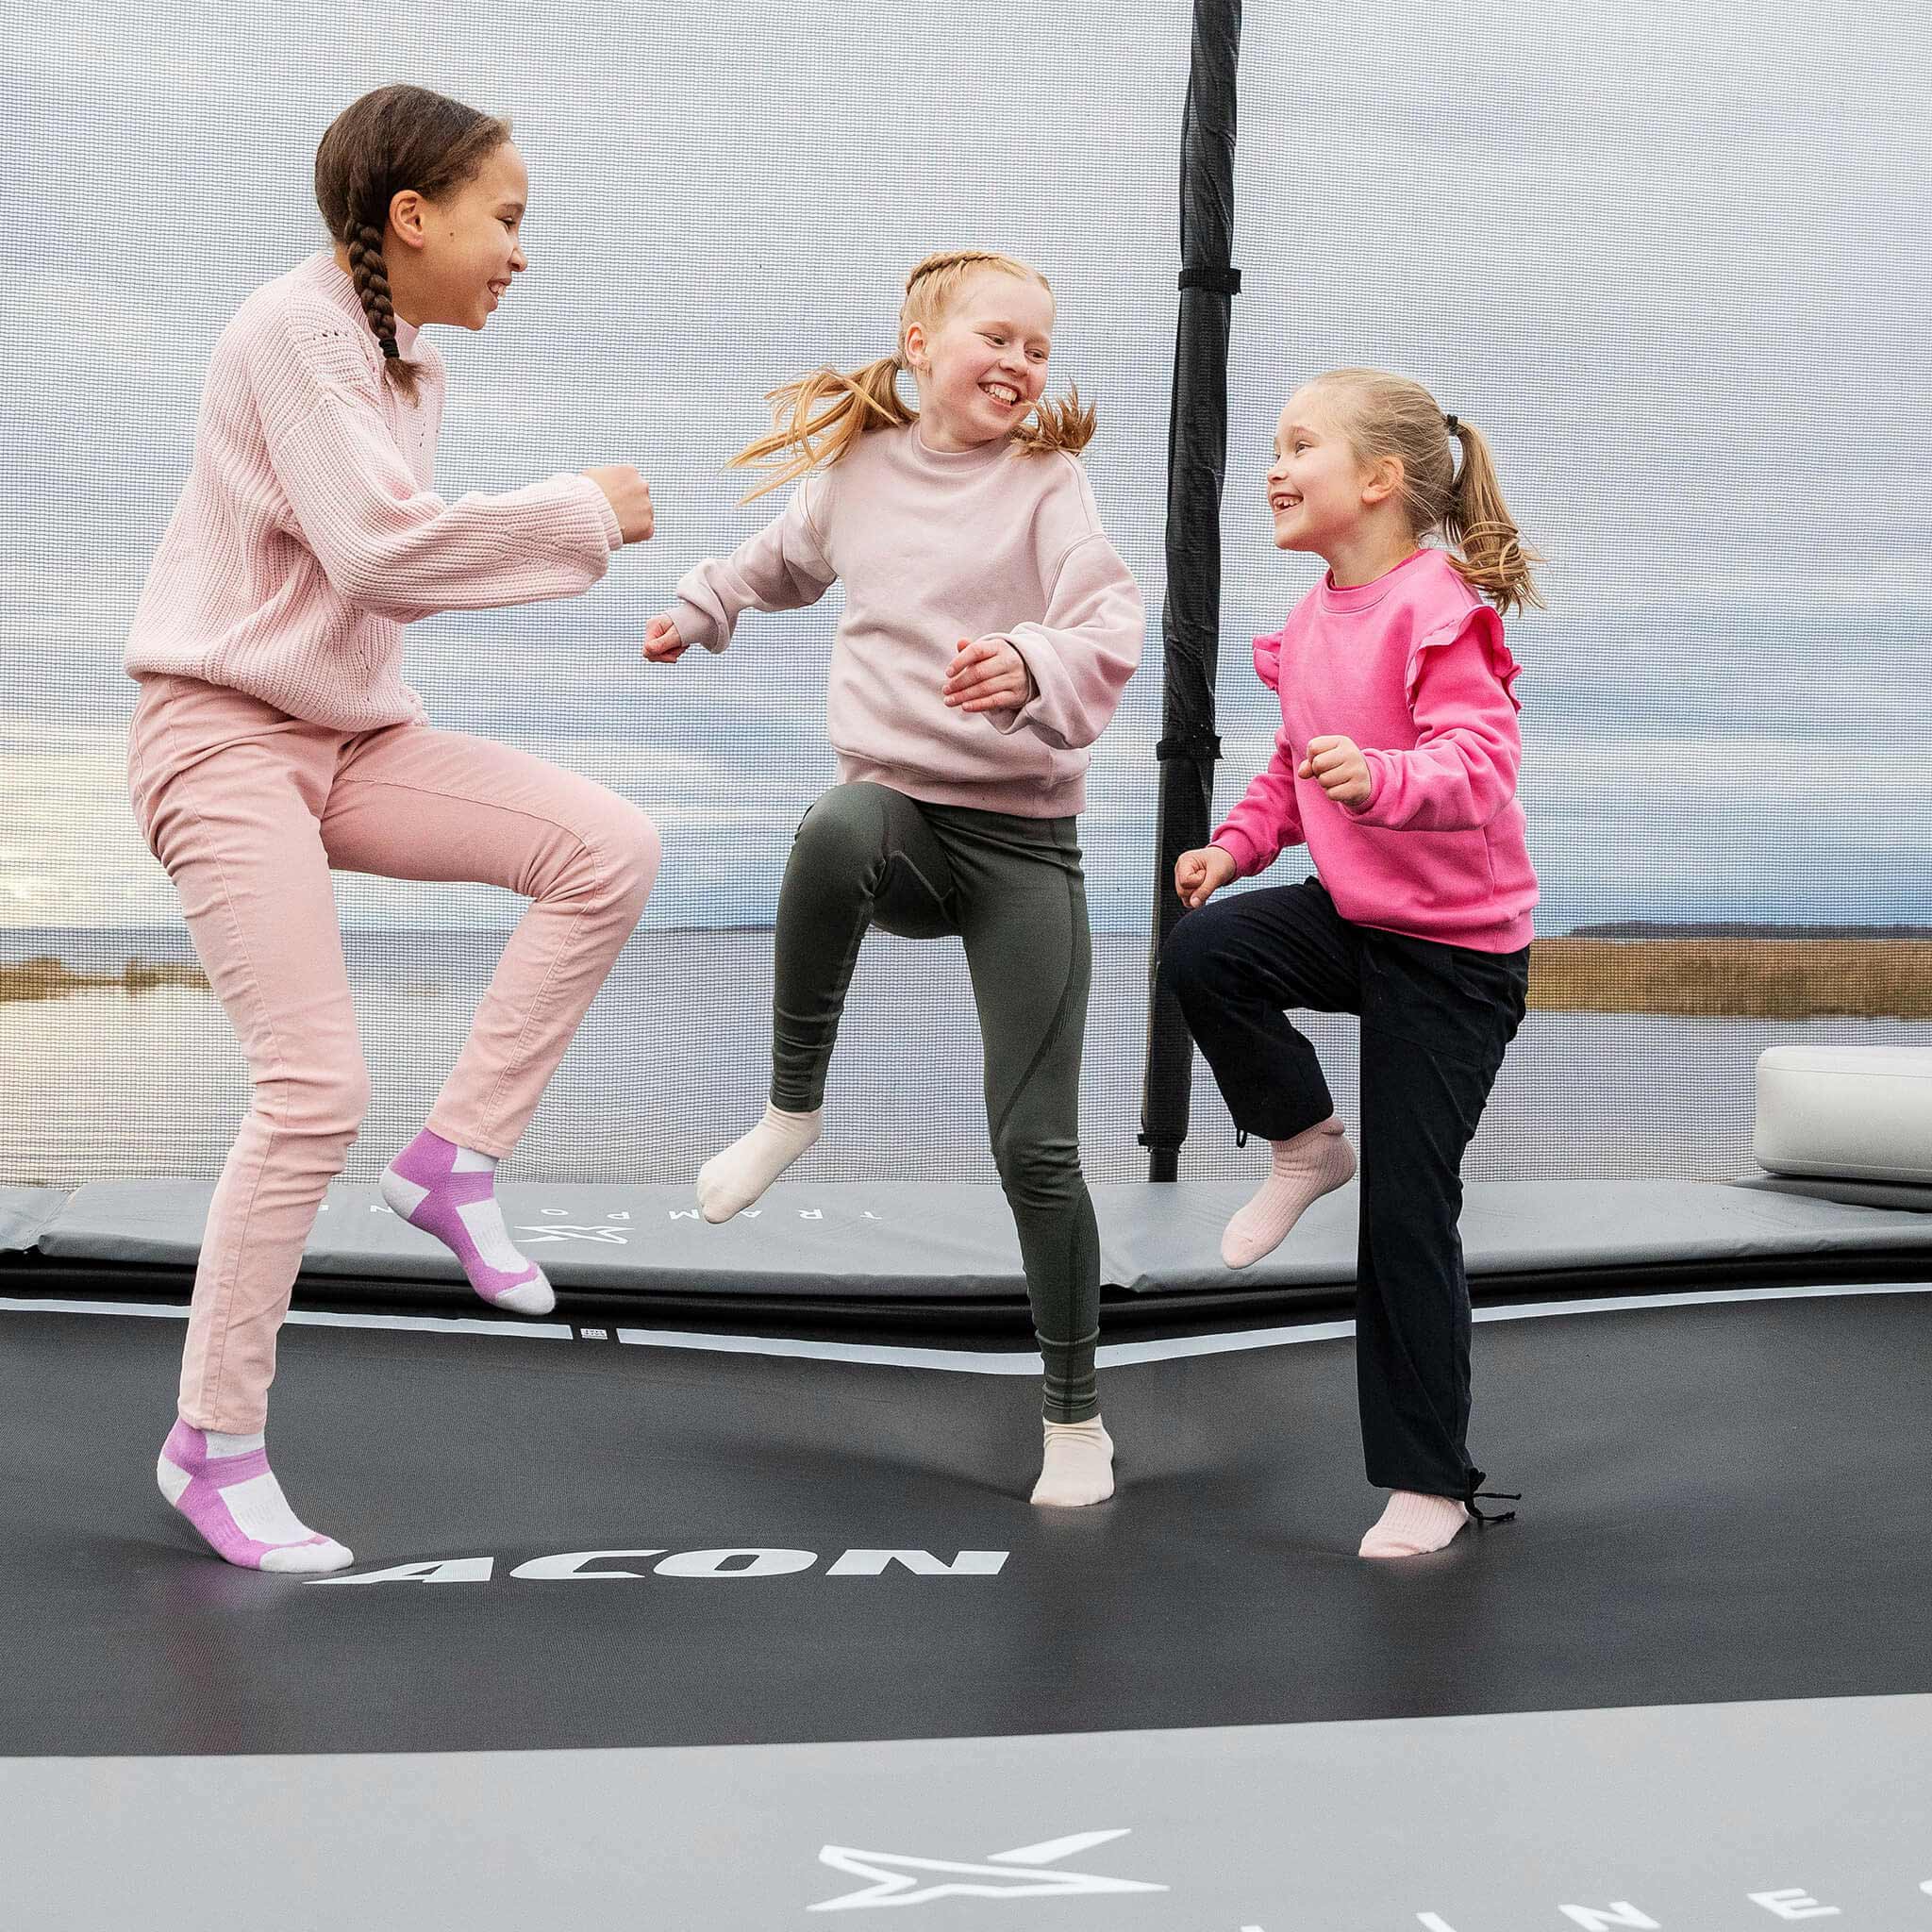 Three happy girls in pink shirts step on the Acon X Trampoline.